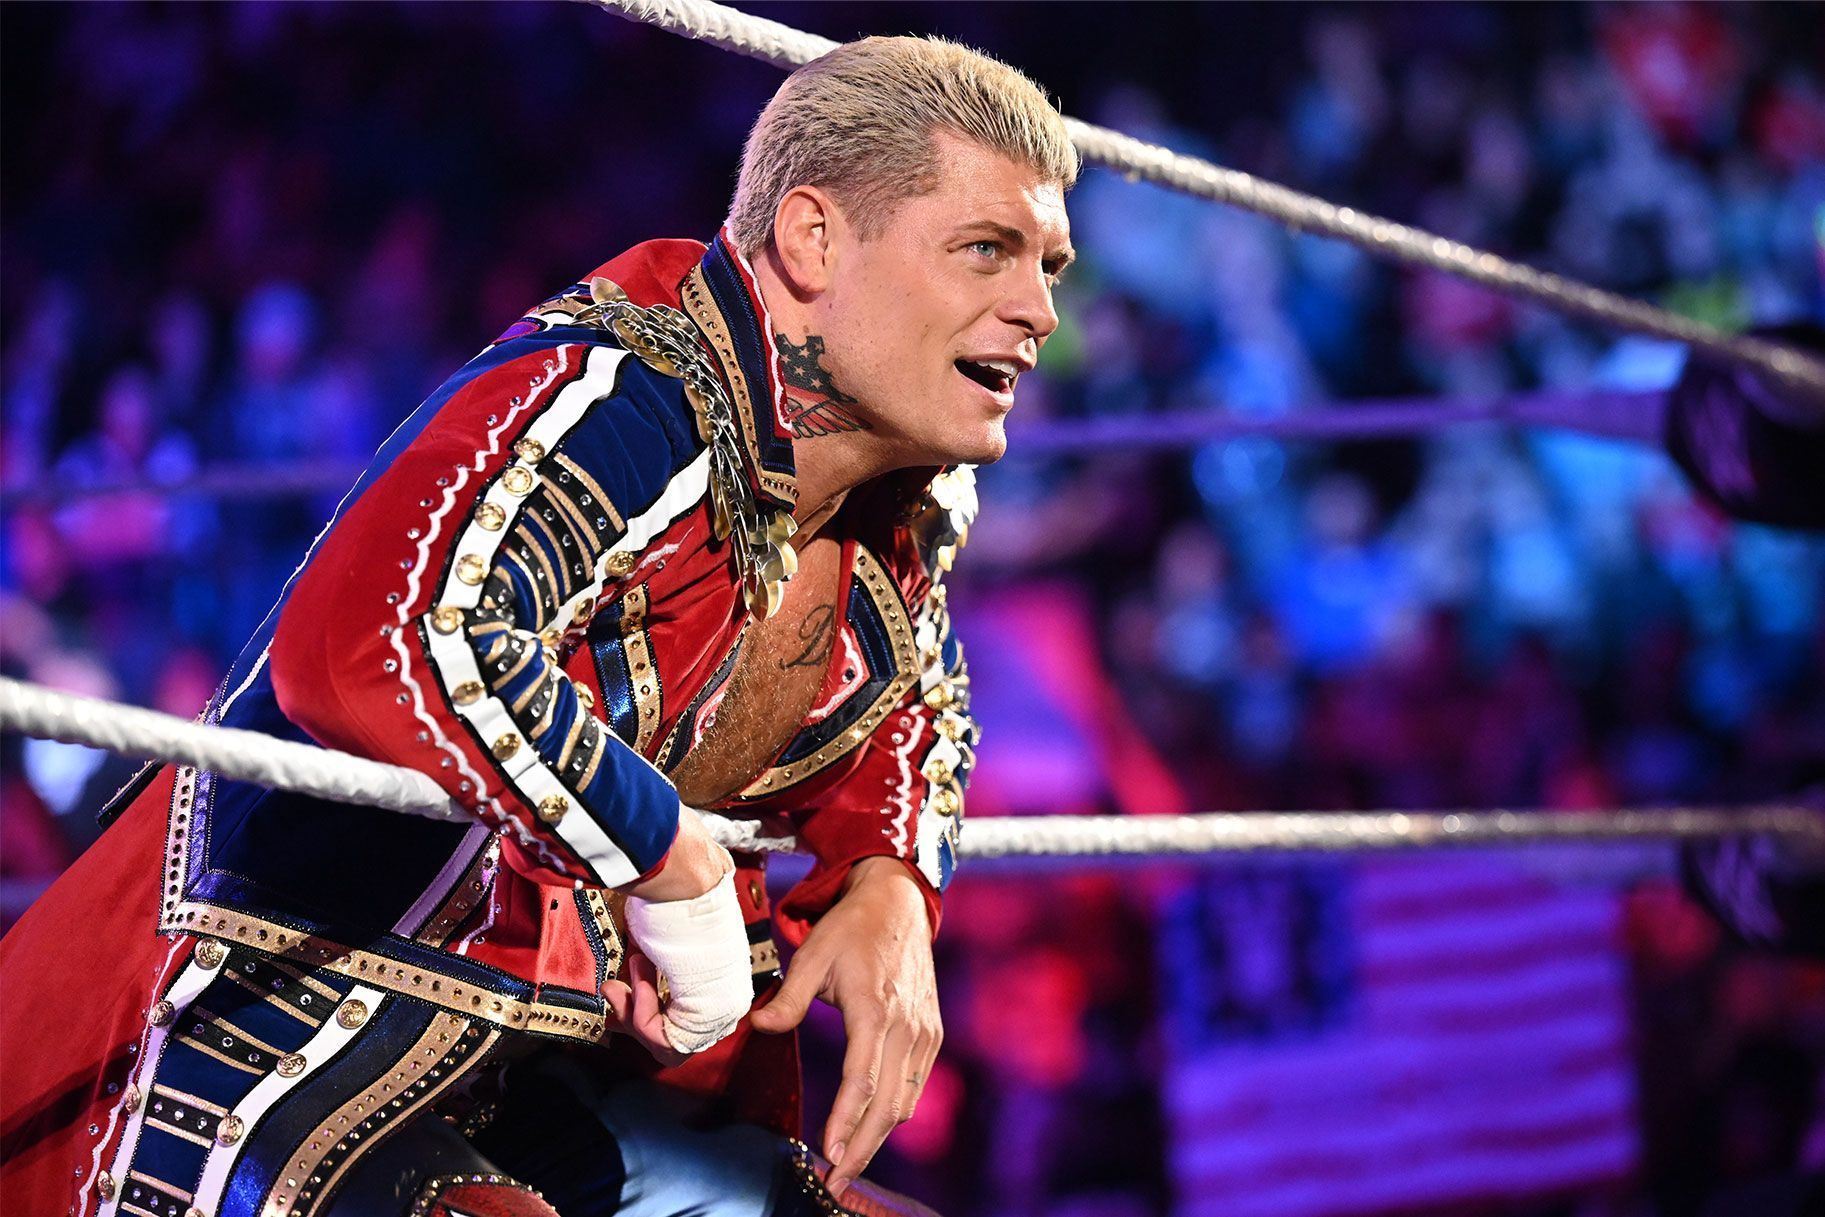 Rhodes could be a surprise entrant in the 2023 Royal Rumble.